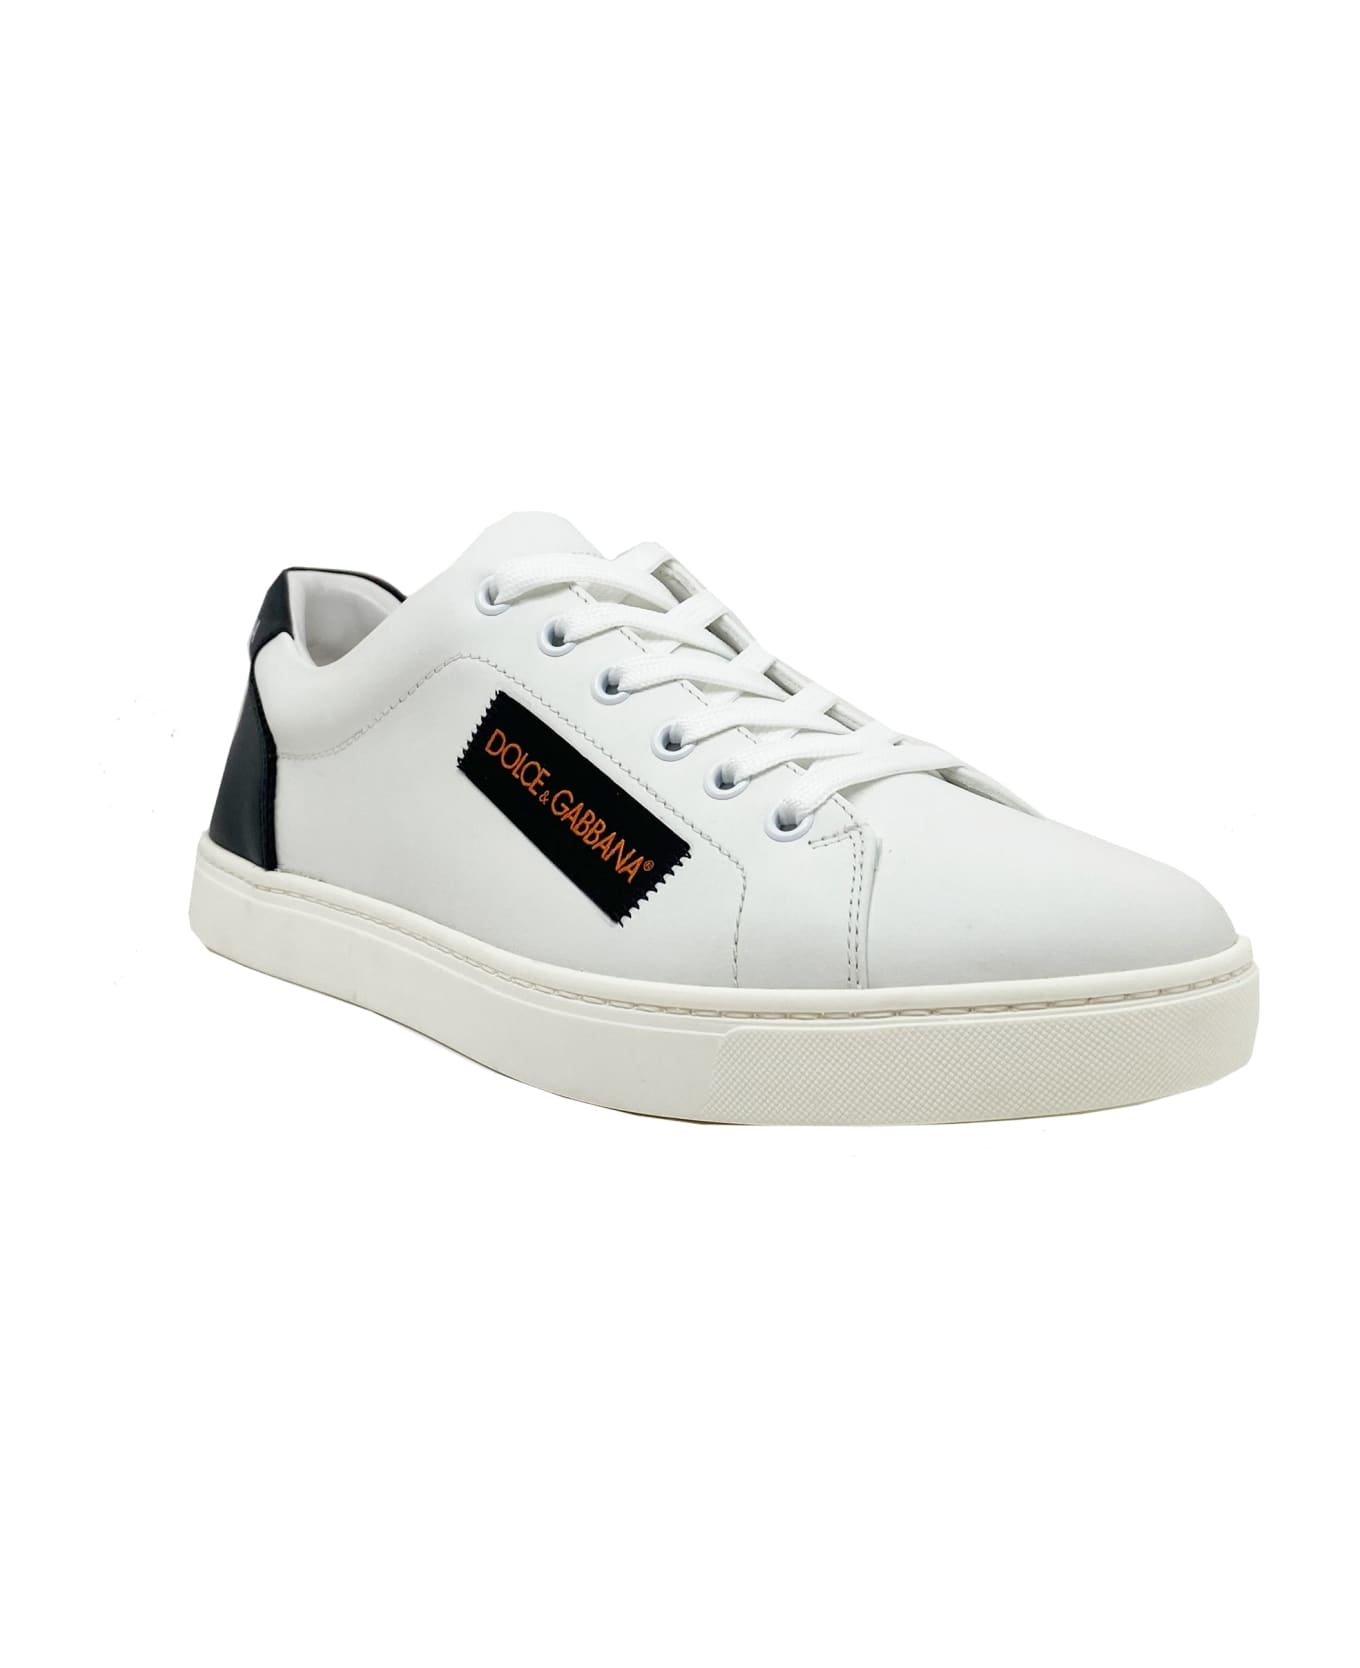 Dolce & Gabbana Logo Leather Sneakers - White